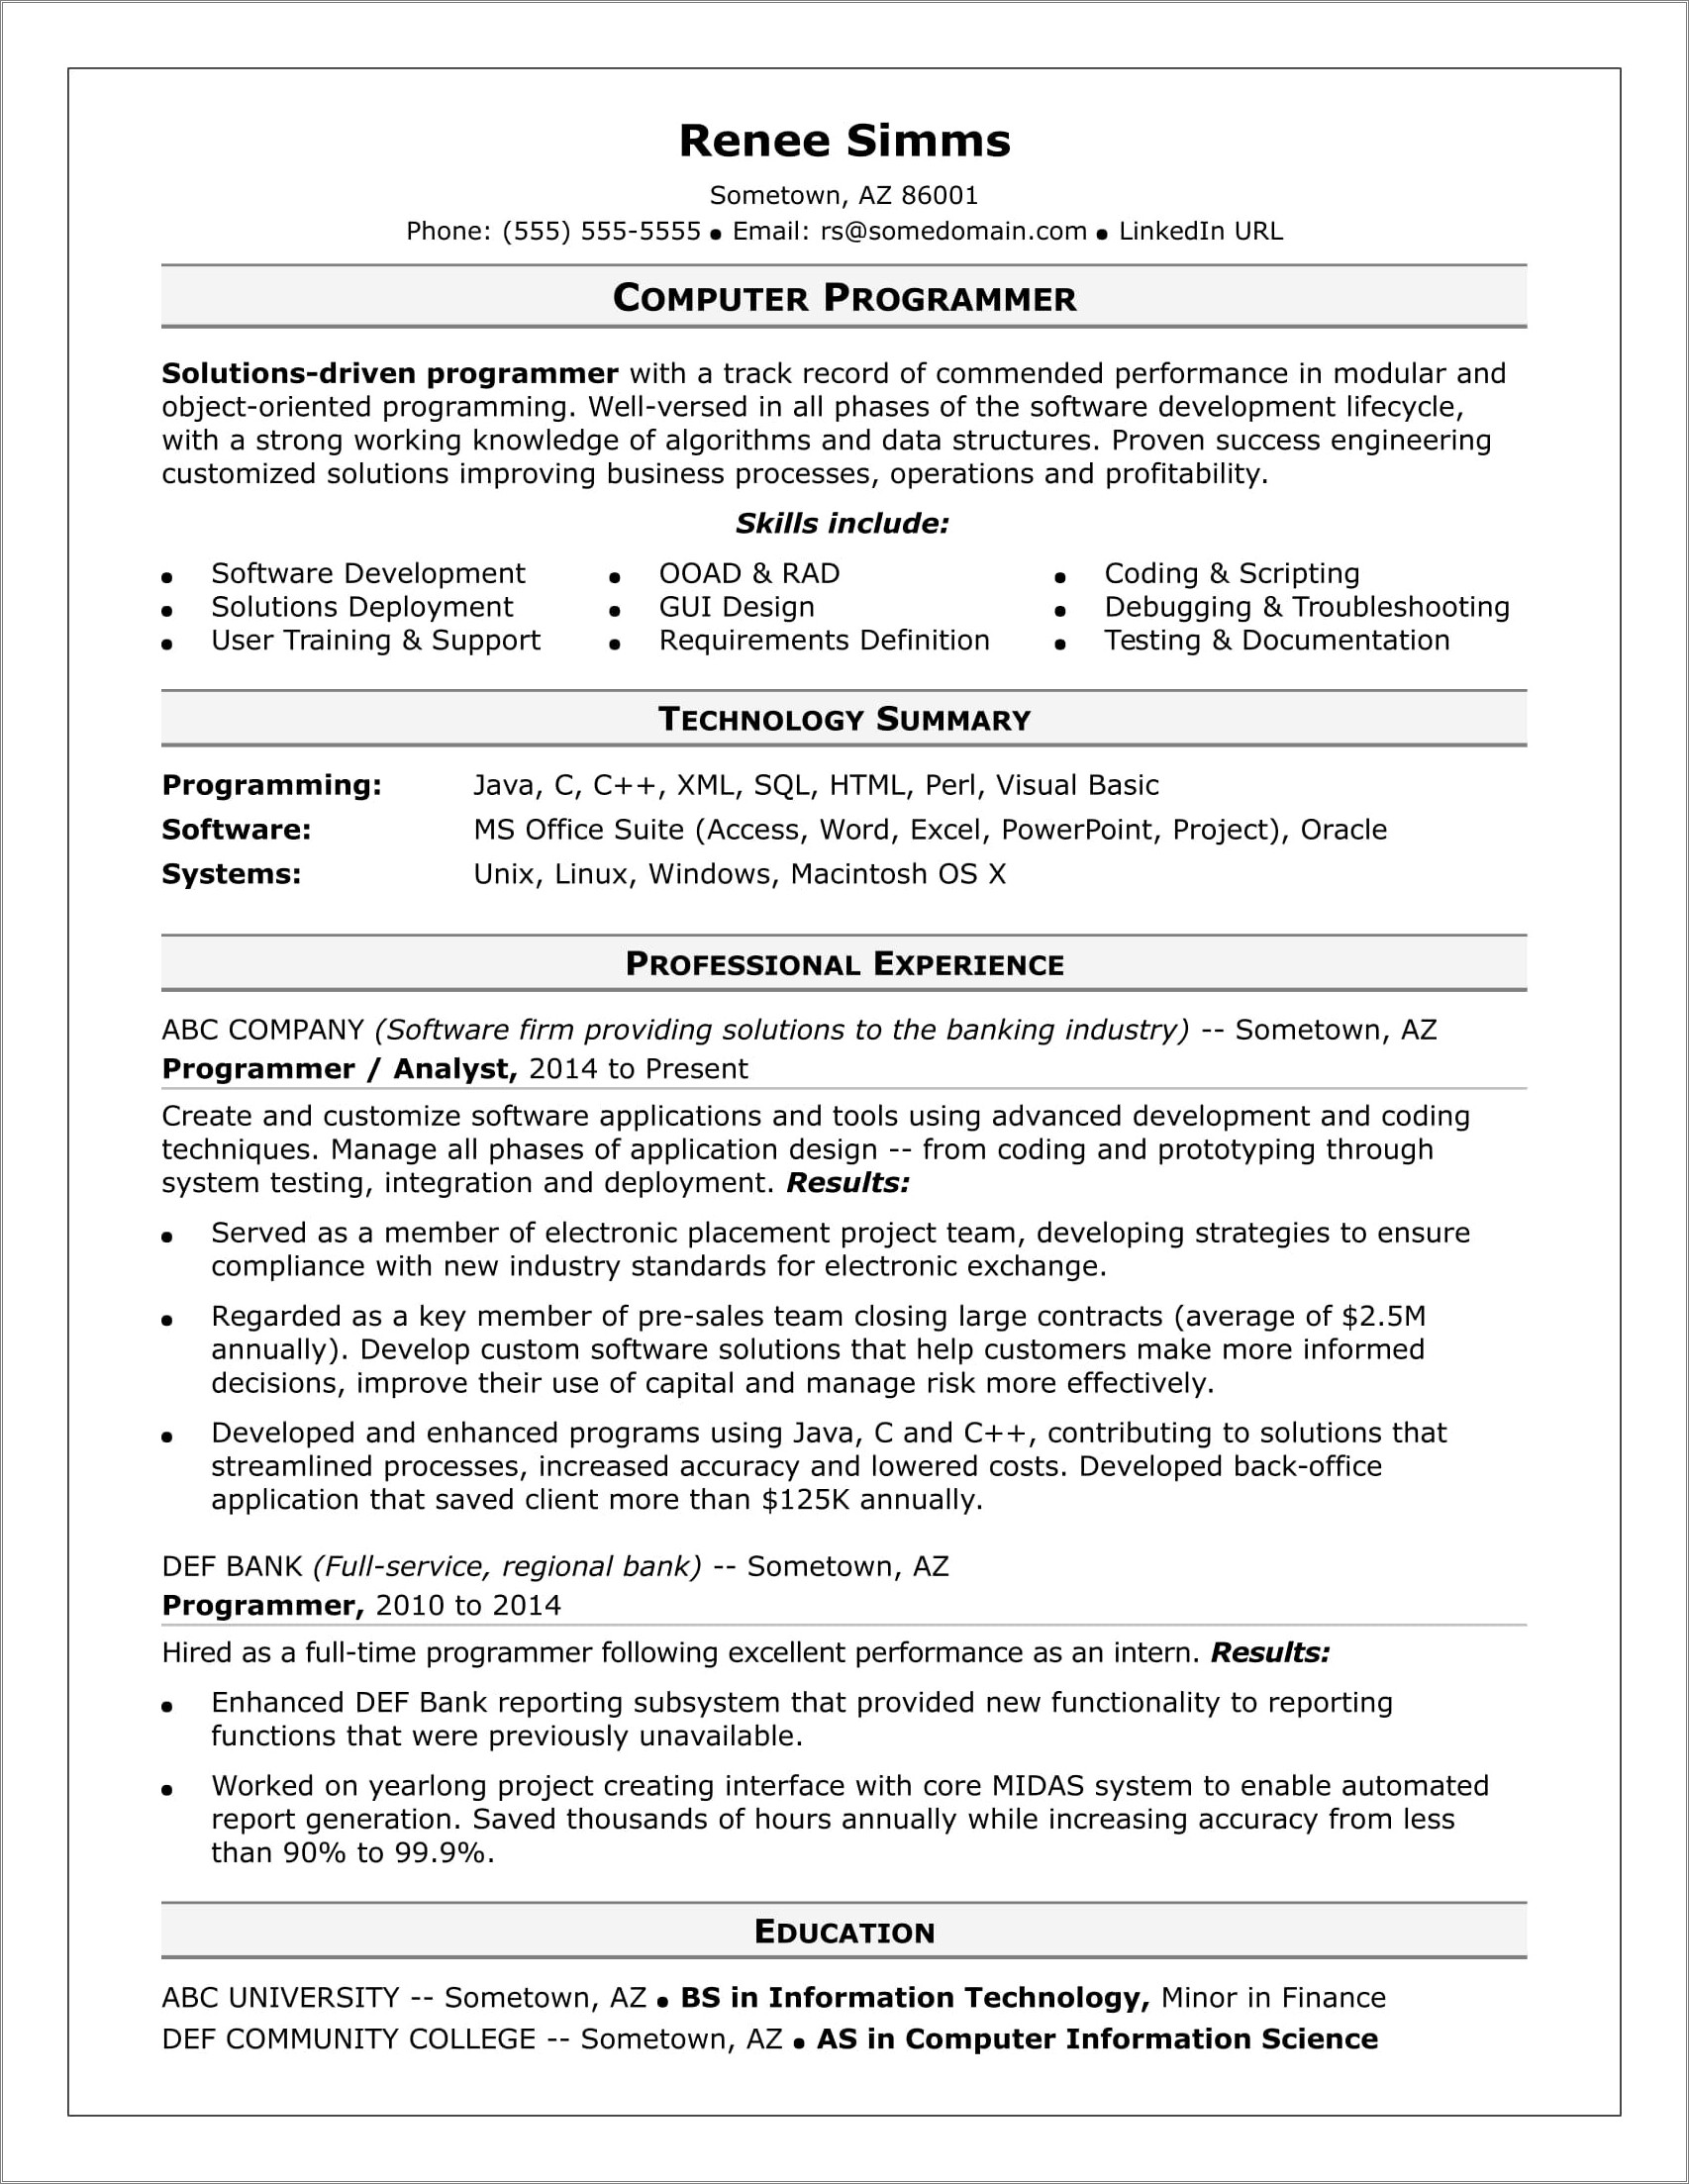 Resume Examples With Computer Experience